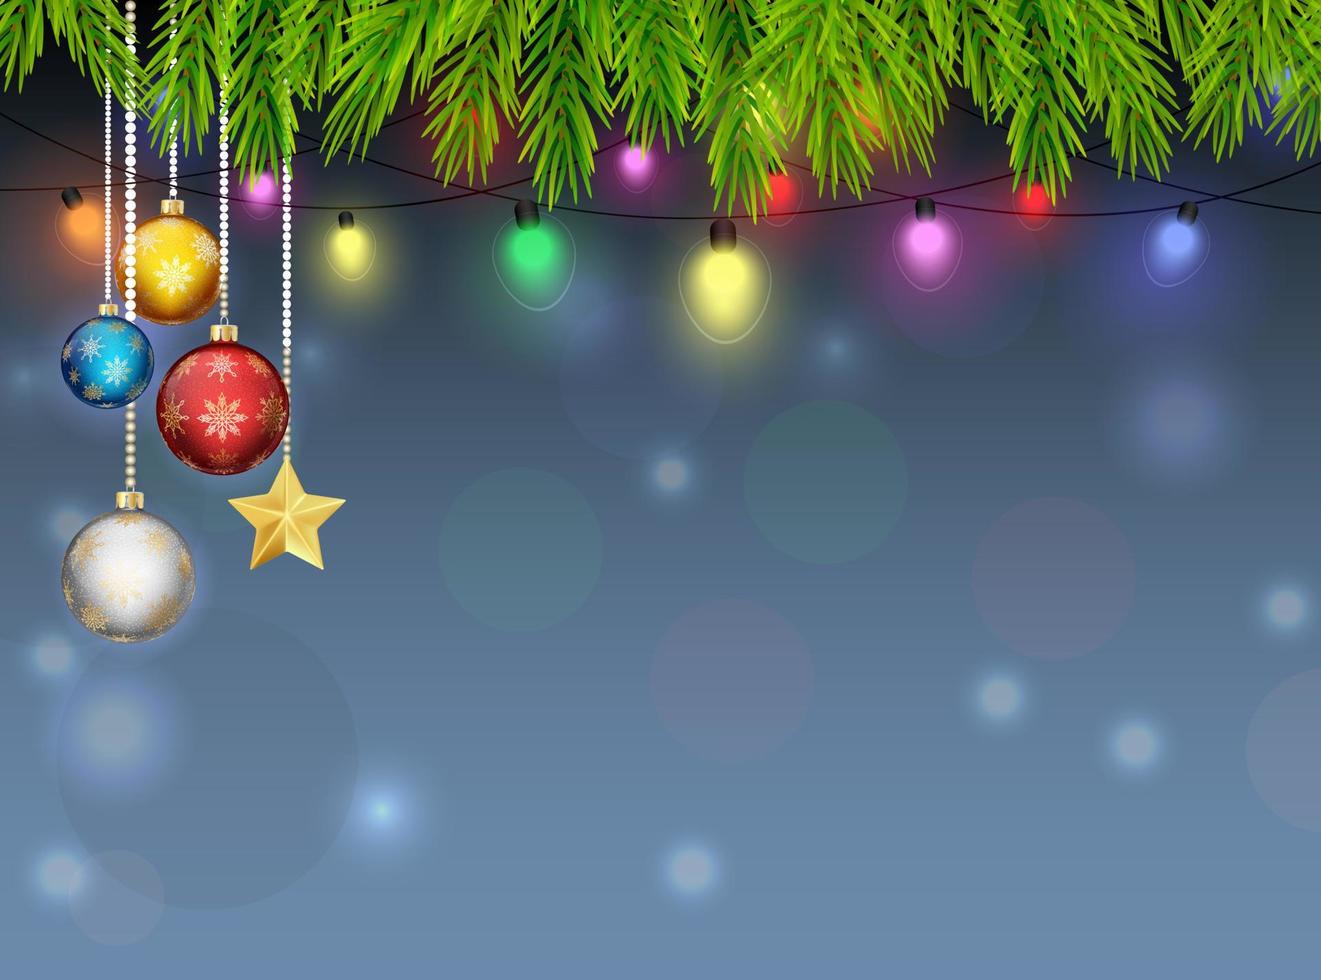 Christmas ornament background vector